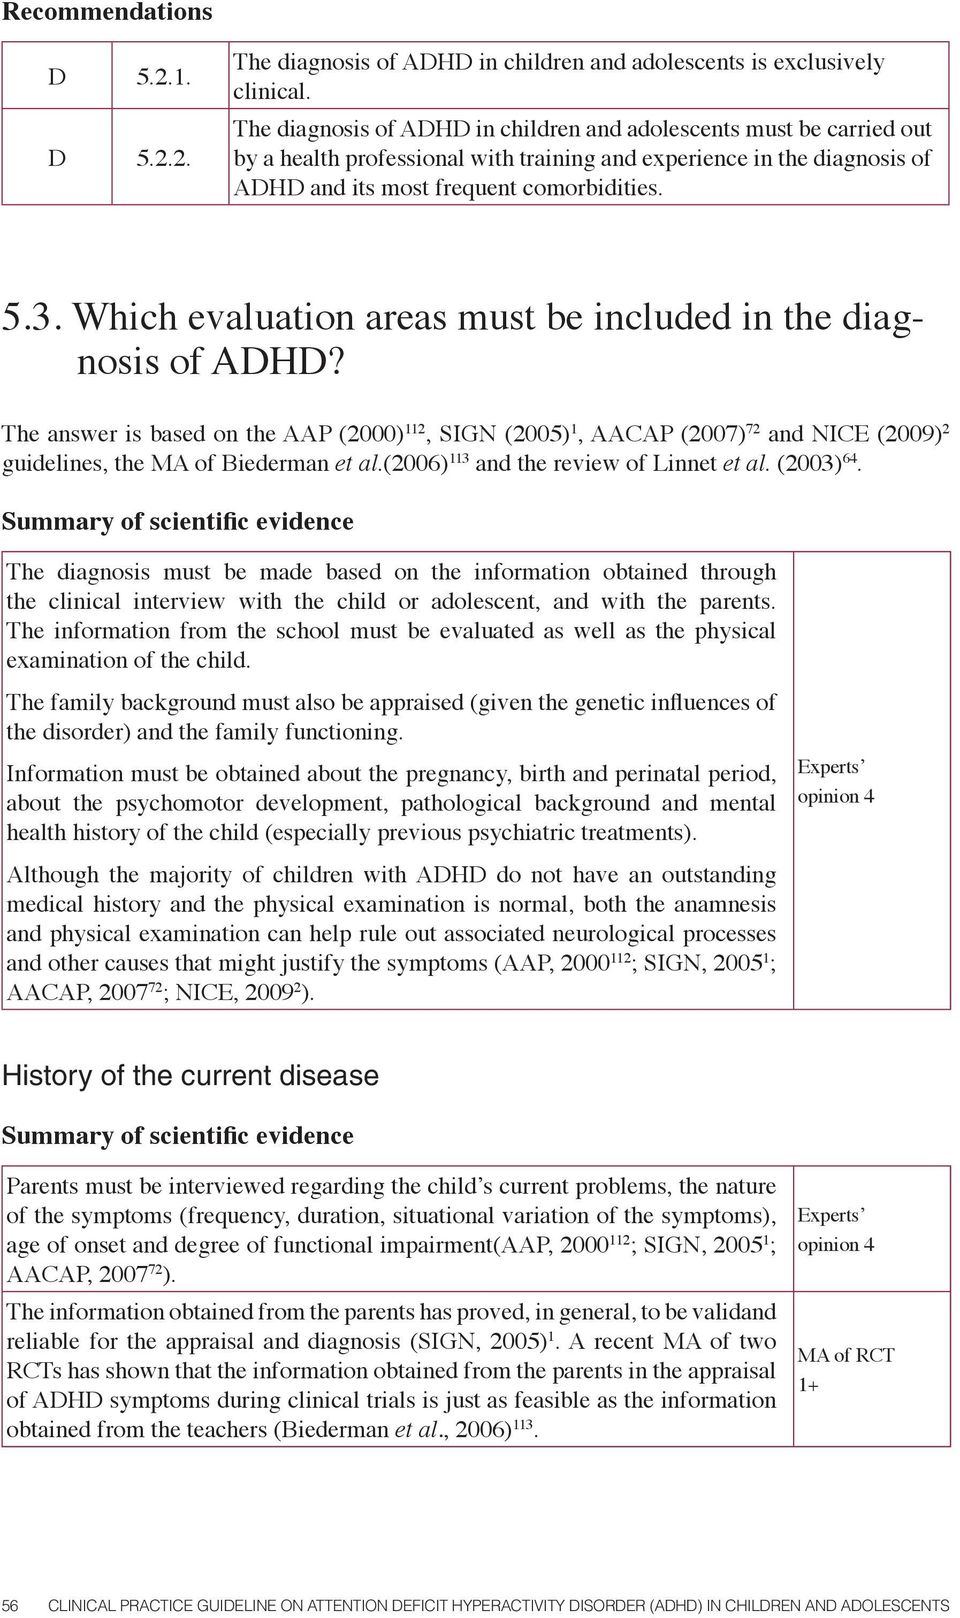 Which evaluation areas must be included in the diagnosis of ADHD? The answer is based on the AAP (2000) 112, SIGN (2005) 1, AACAP (2007) 72 and NICE (2009) 2 guidelines, the MA of Biederman et al.